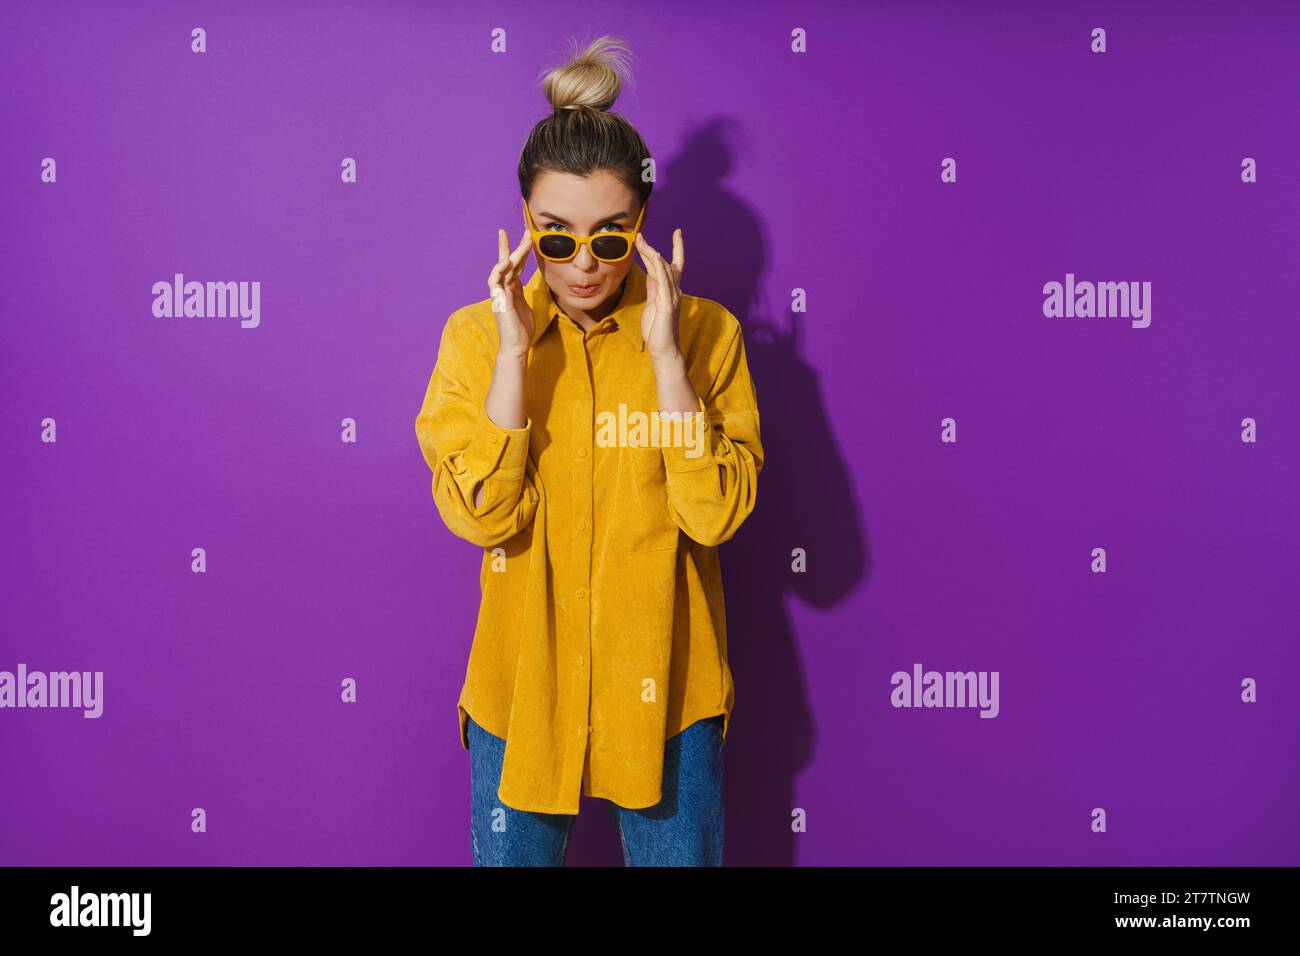 Young girl wearing yellow shirt and sunglasses making silly face expression against purple background Stock Photo